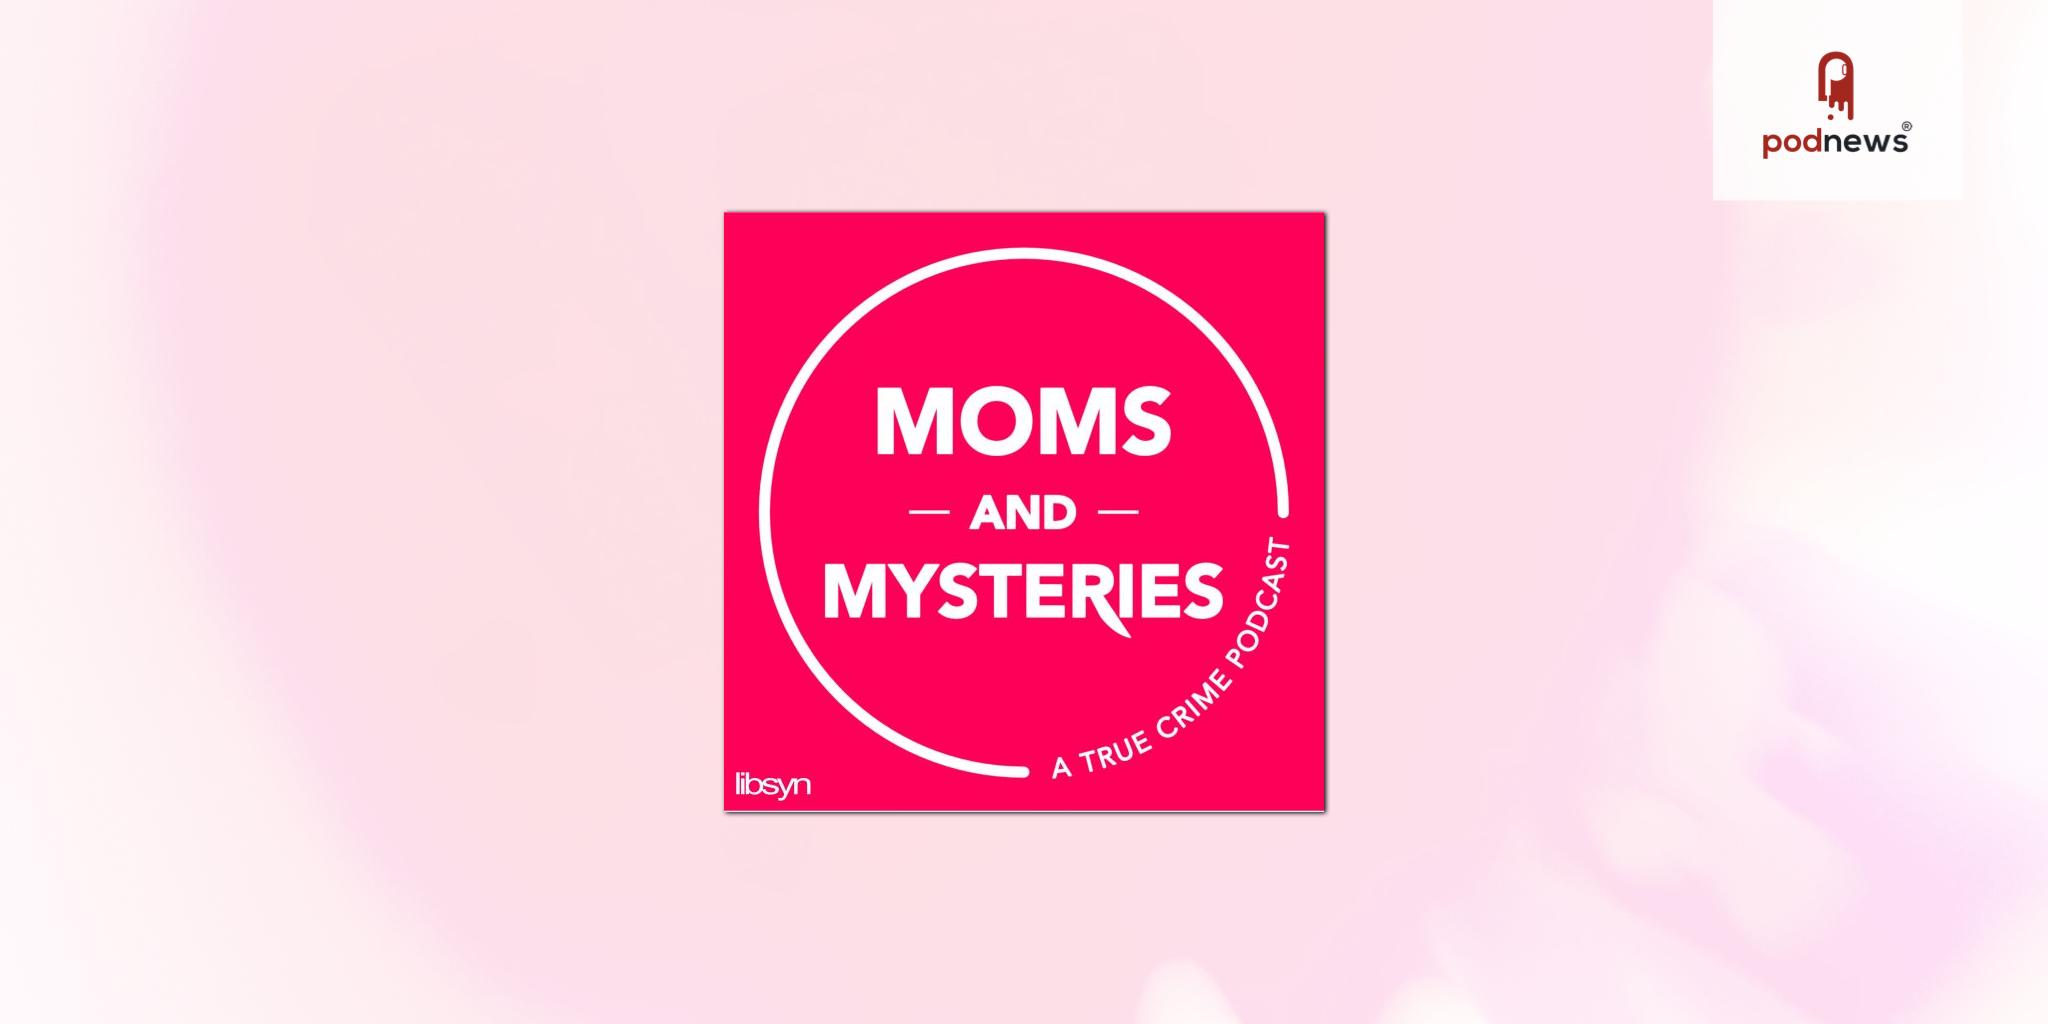 Libsyn's AdvertiseCast Re-Ups Exclusive Advertising Partnership with True Crime Podcast – Moms and Mysteries